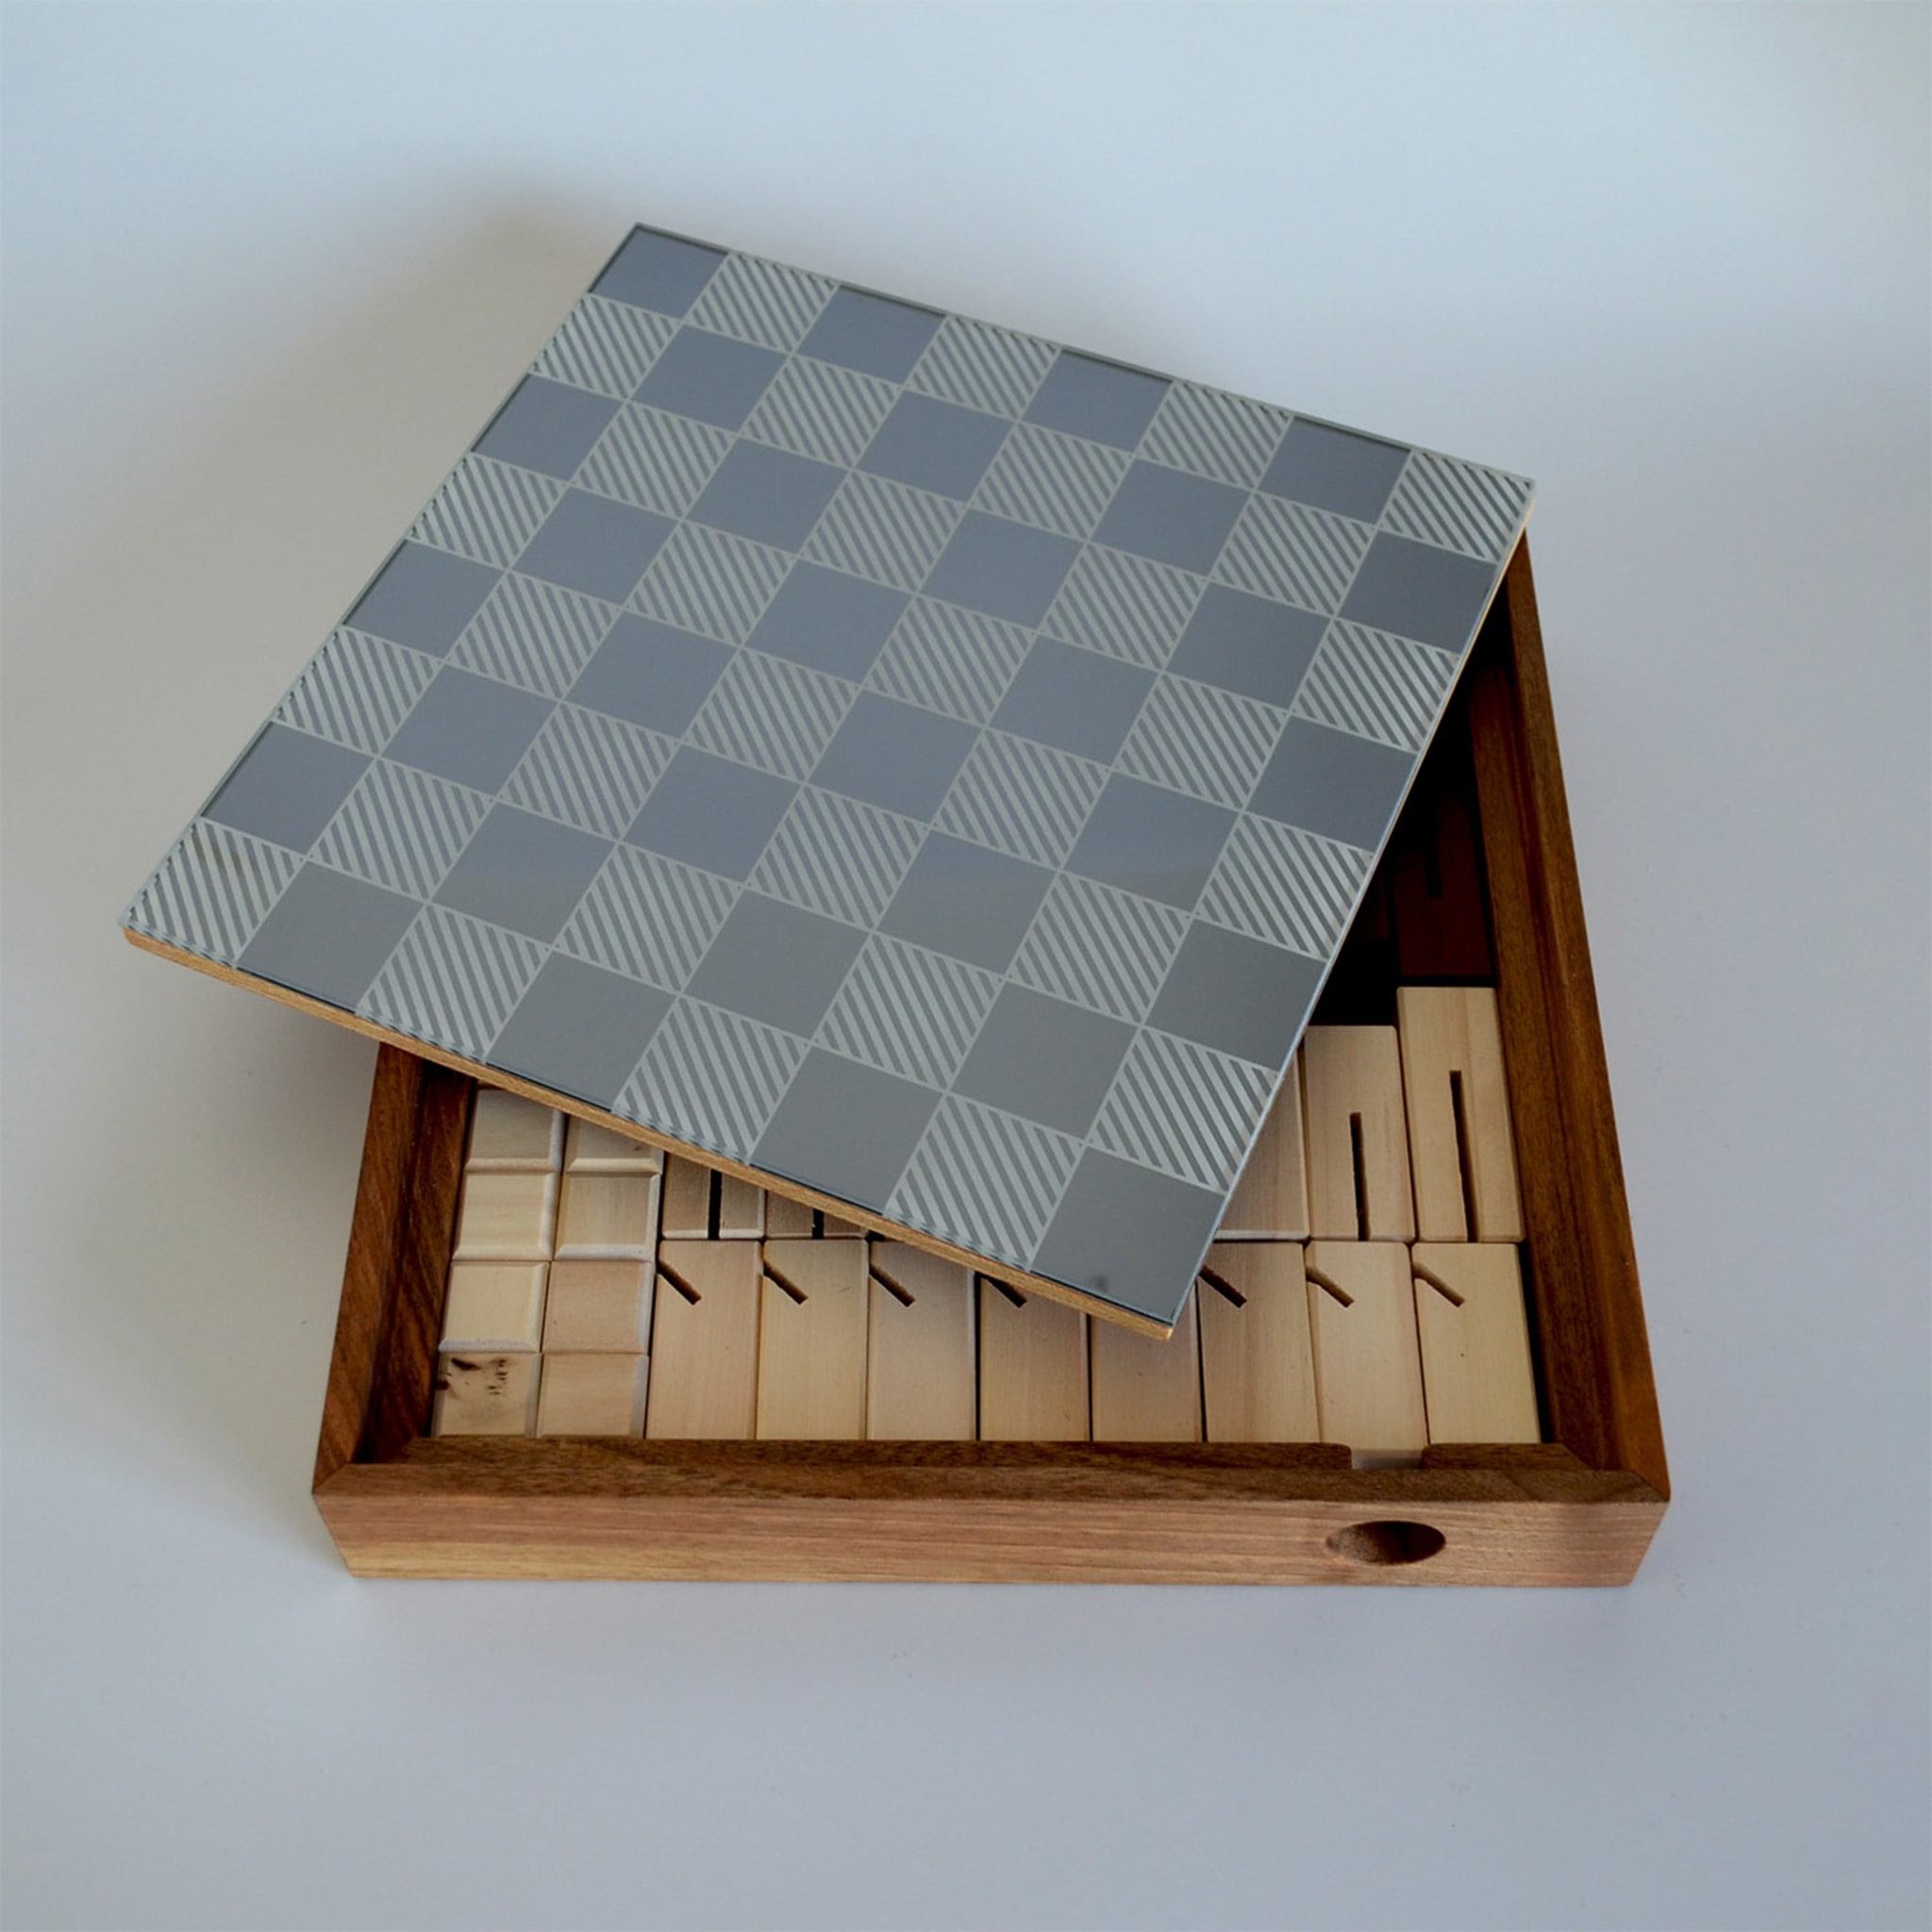 Chessboard by Marco Gavotto - Alternative view 2